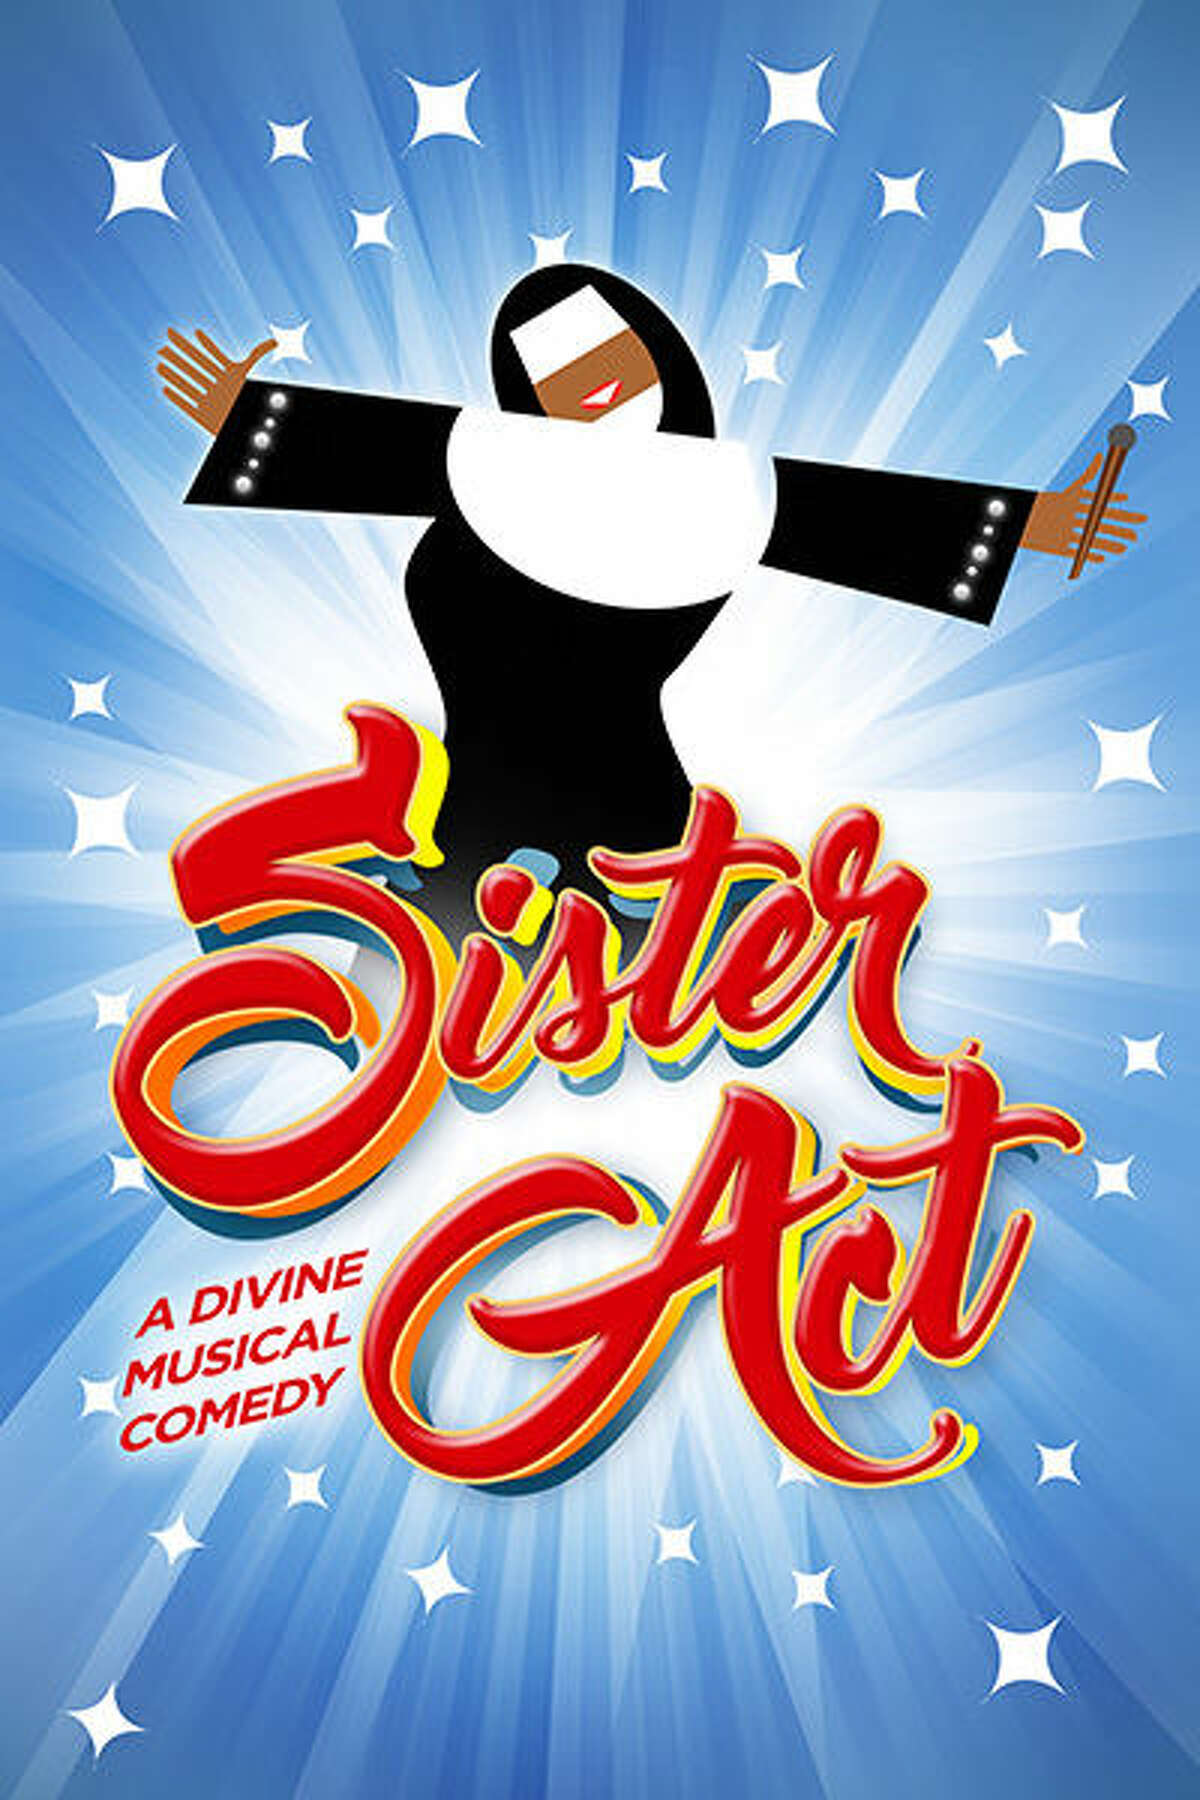 STAGES to present "Sister Act"